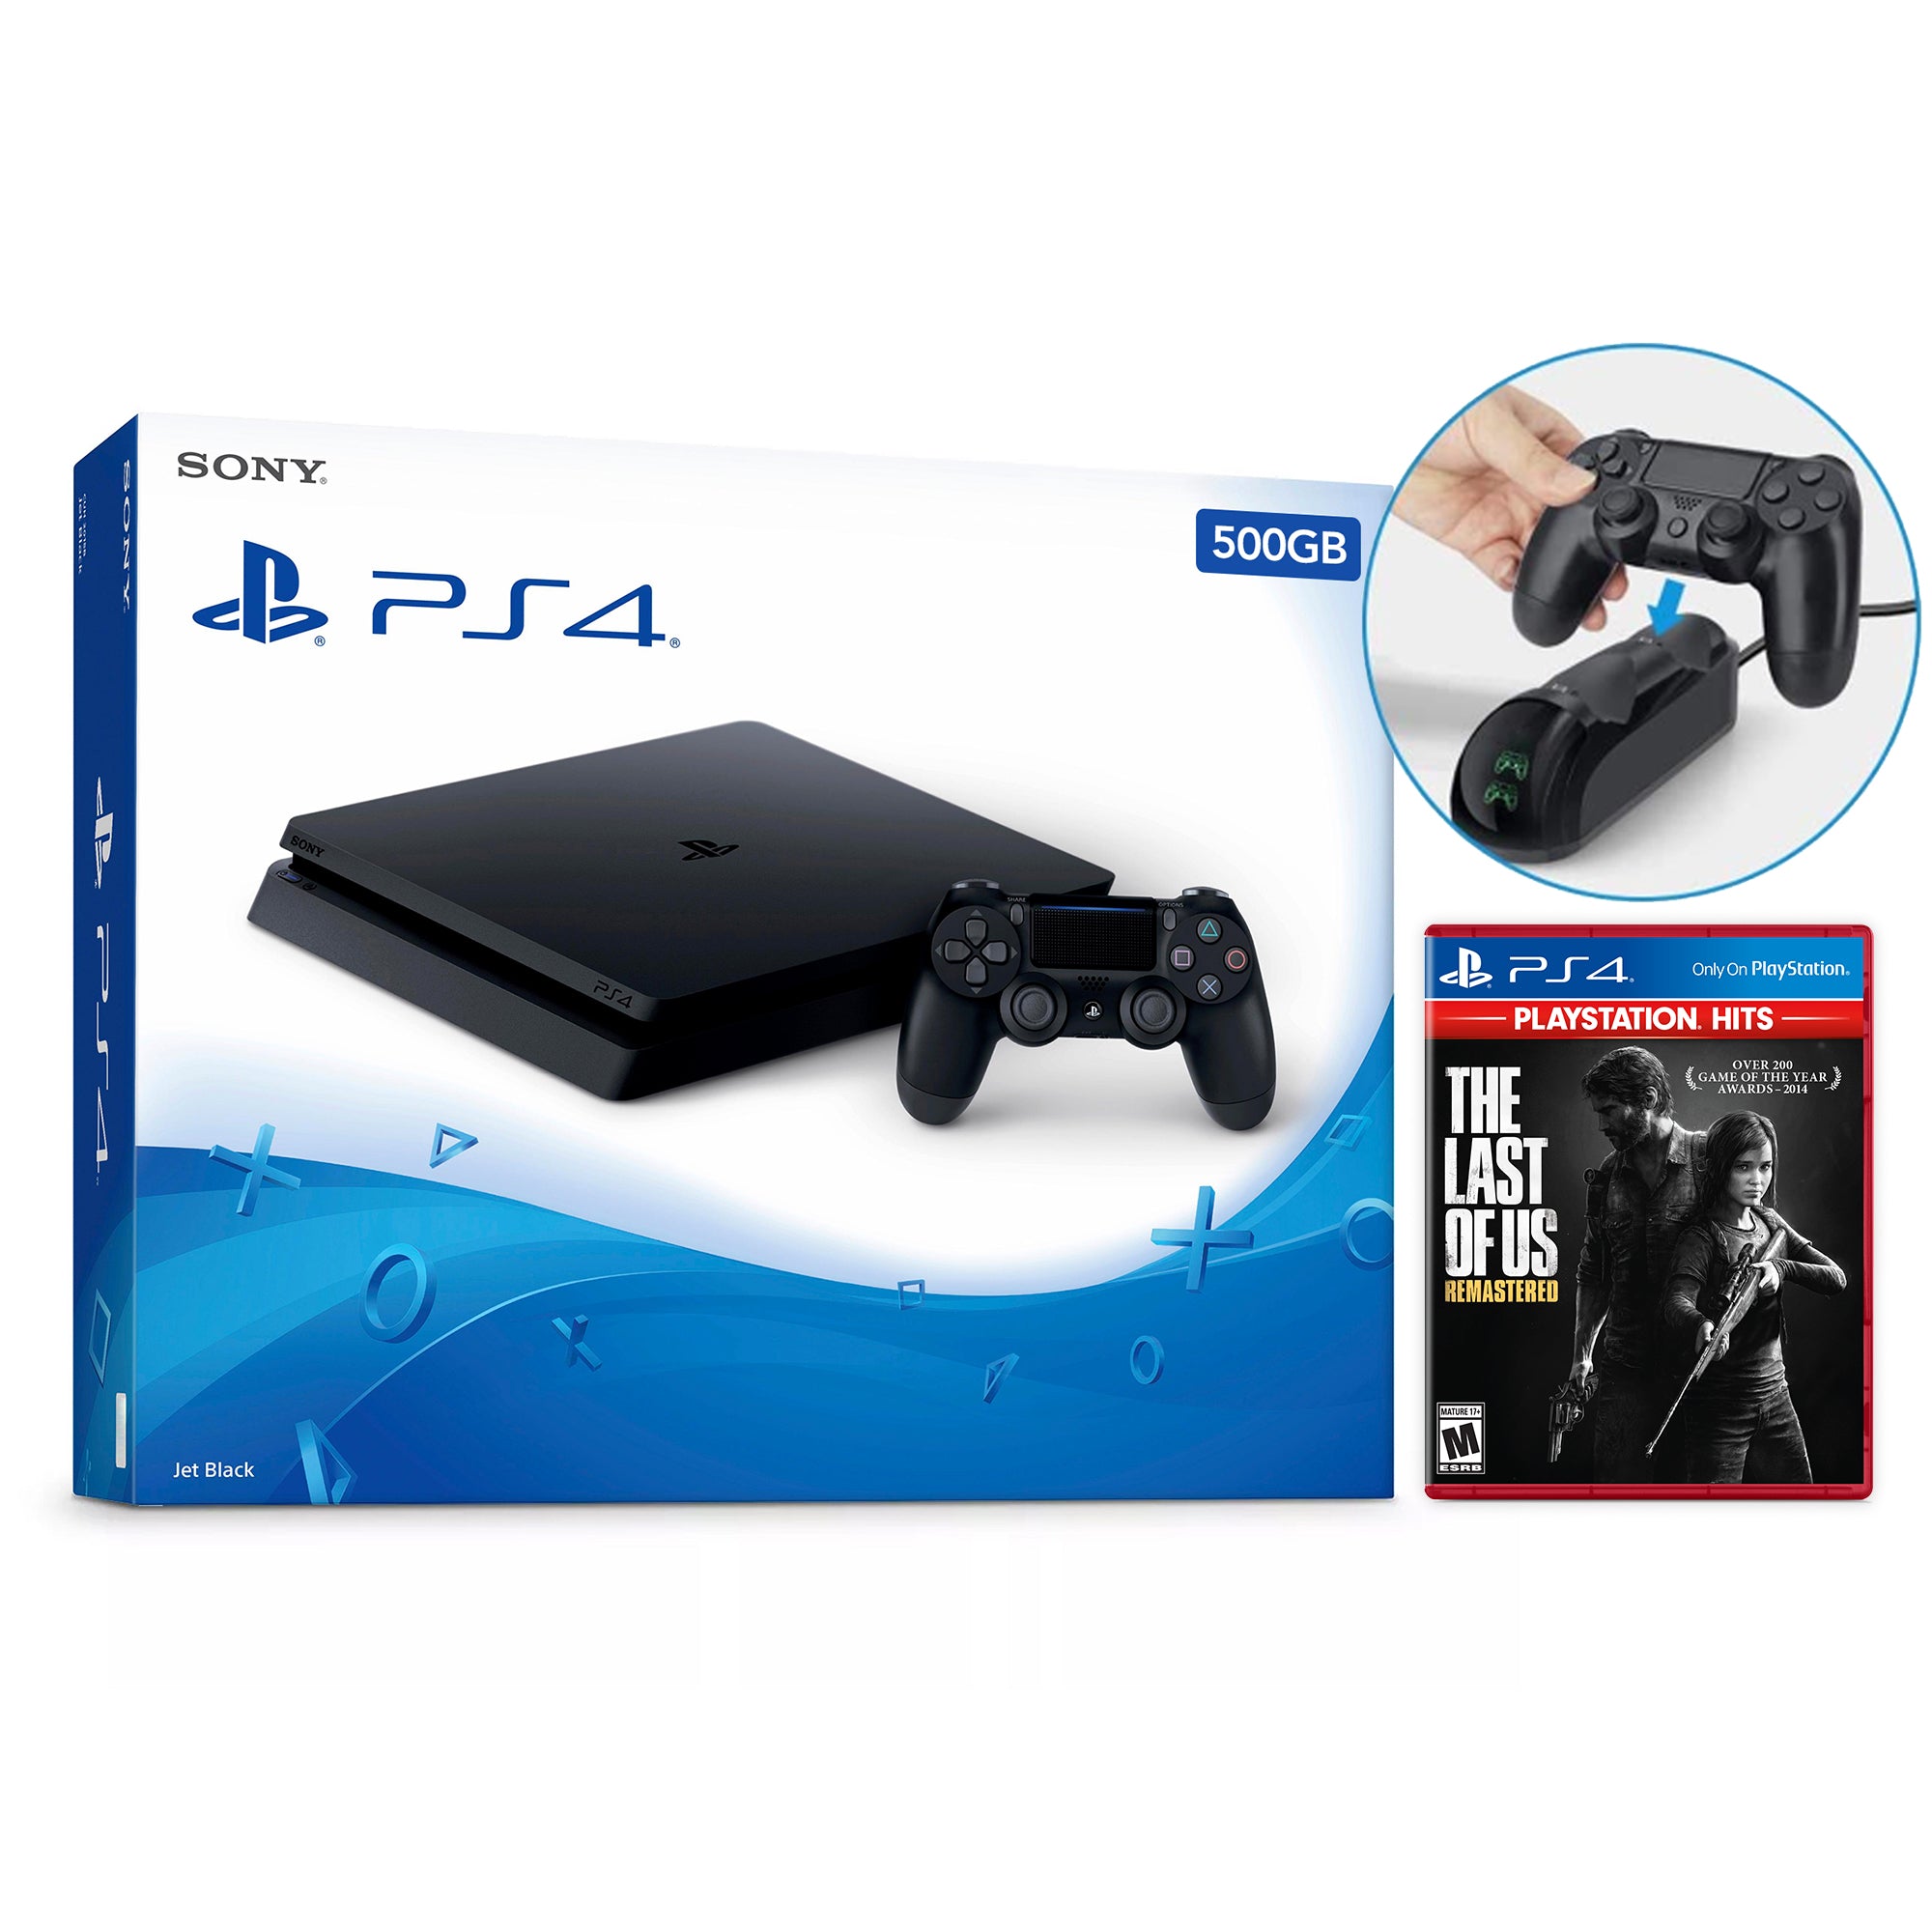 Sony PlayStation 4 Slim Call of Duty Modern Warfare II Bundle 500GB PS4 Gaming Console, Jet Black, with Mytrix Dual-Controller Fast Charger